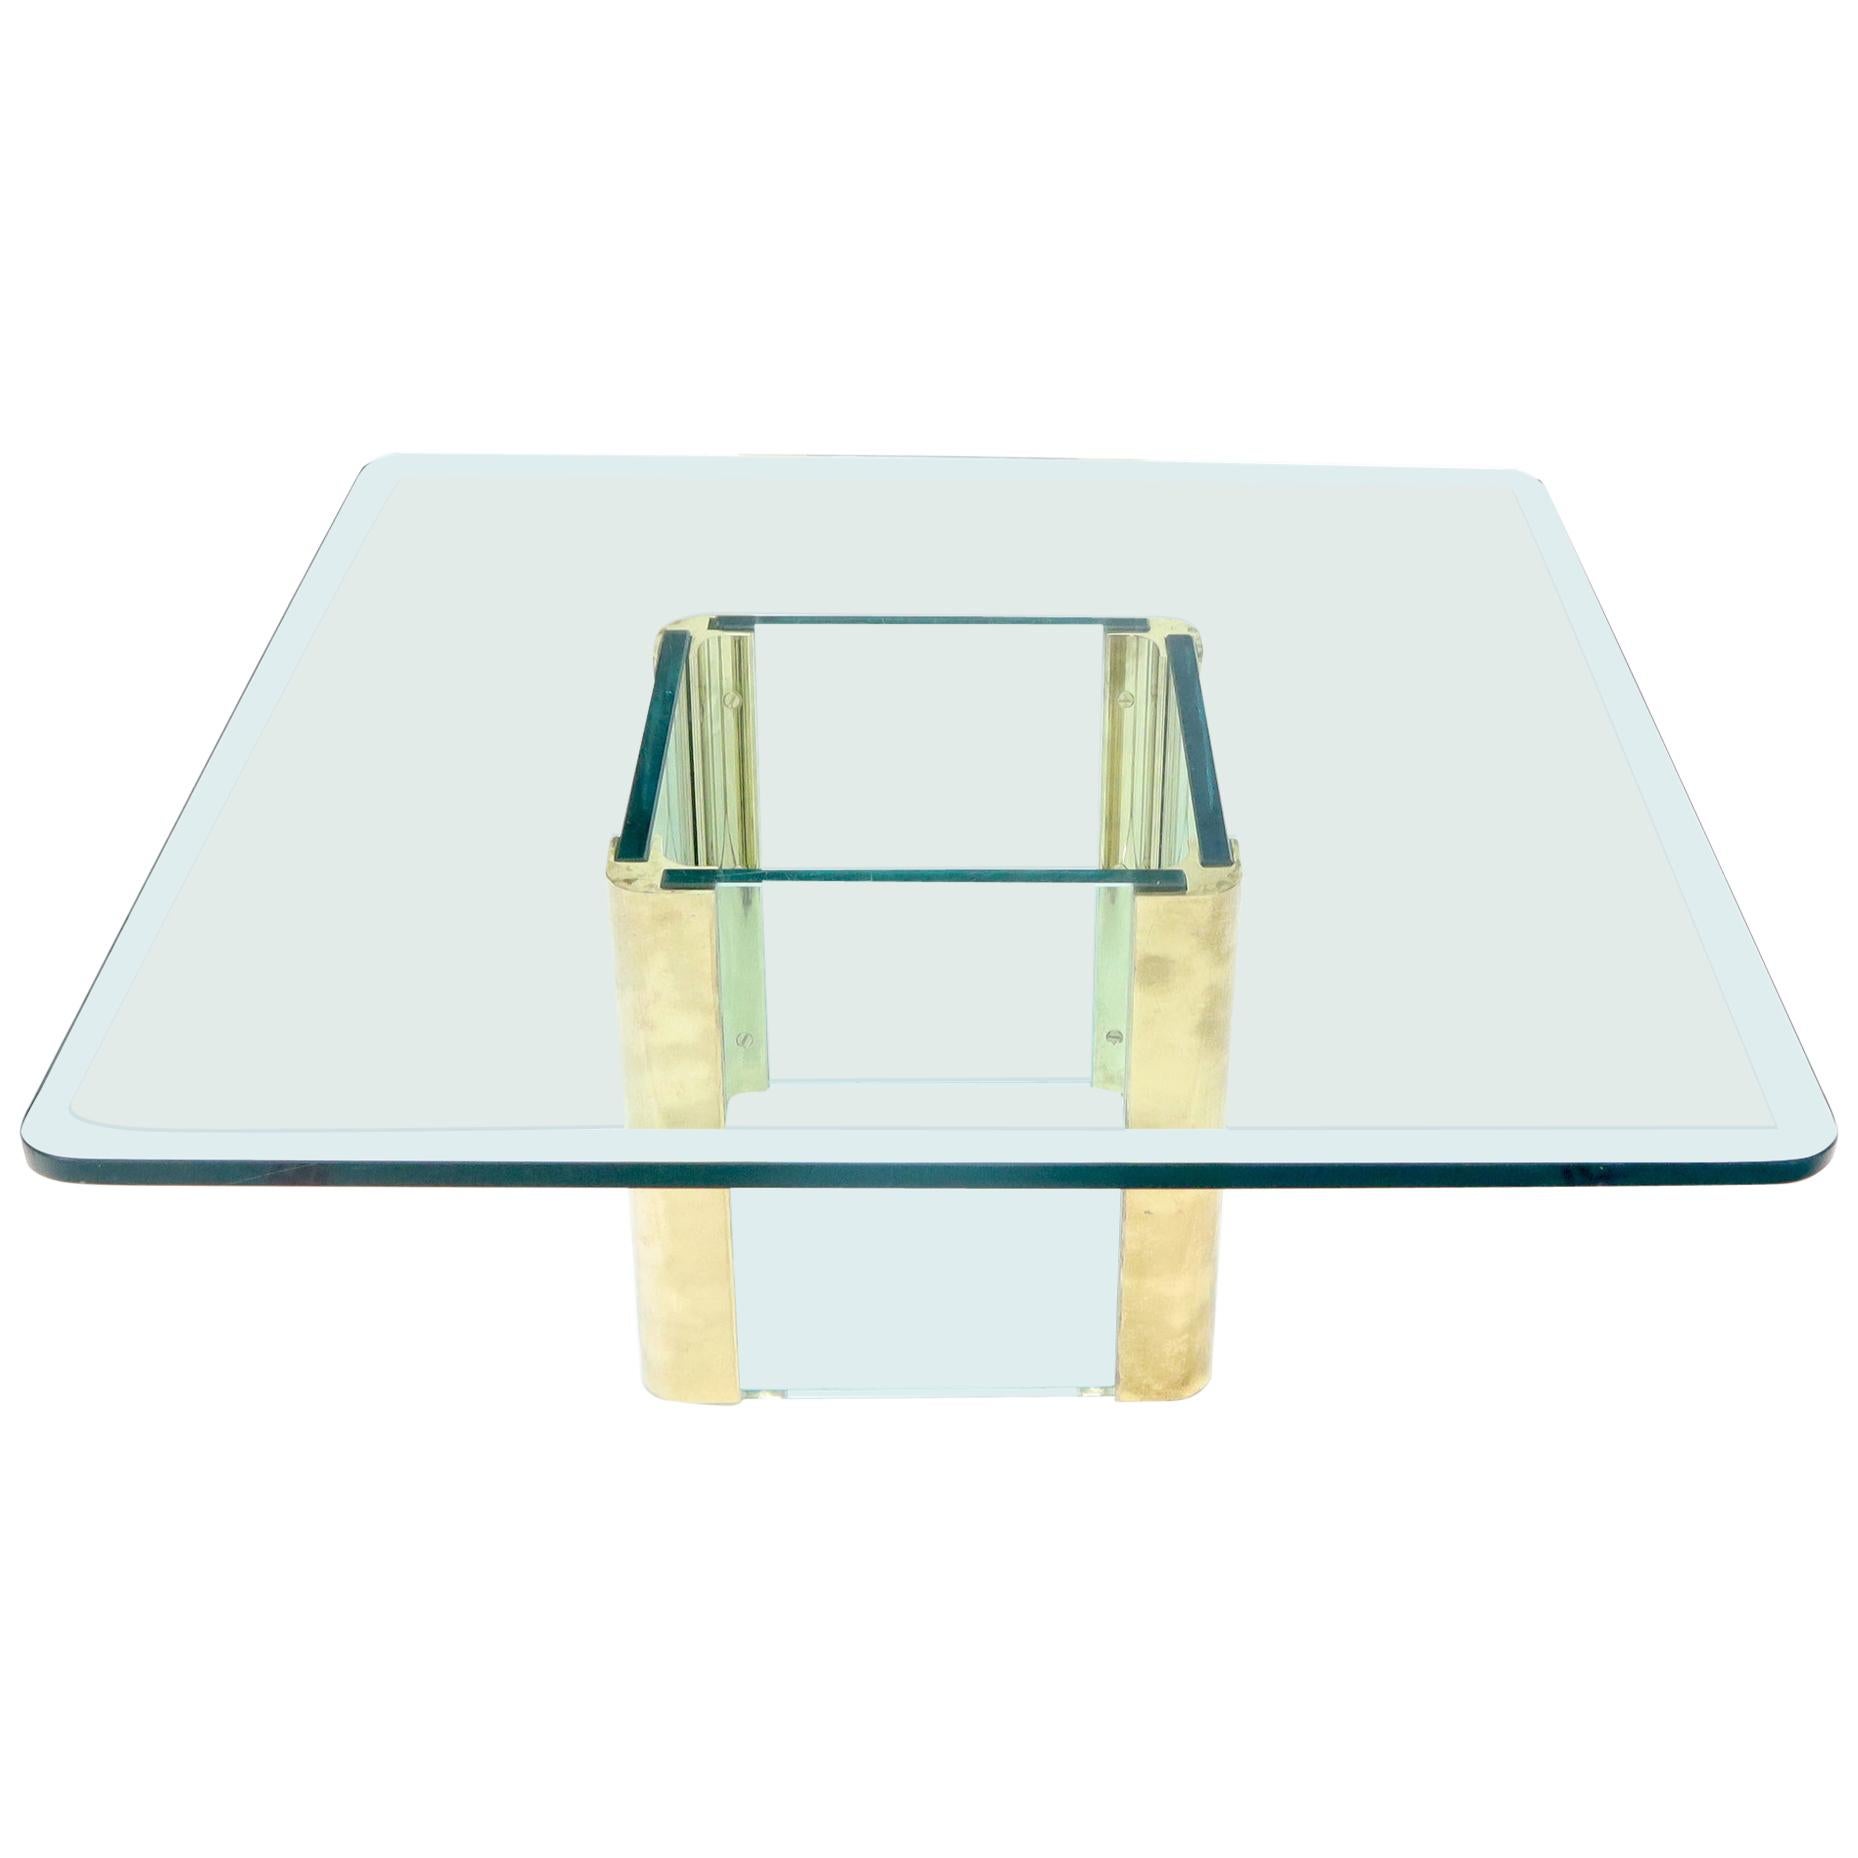 Mid-Century Modern Square Glass and Brass Coffee Table